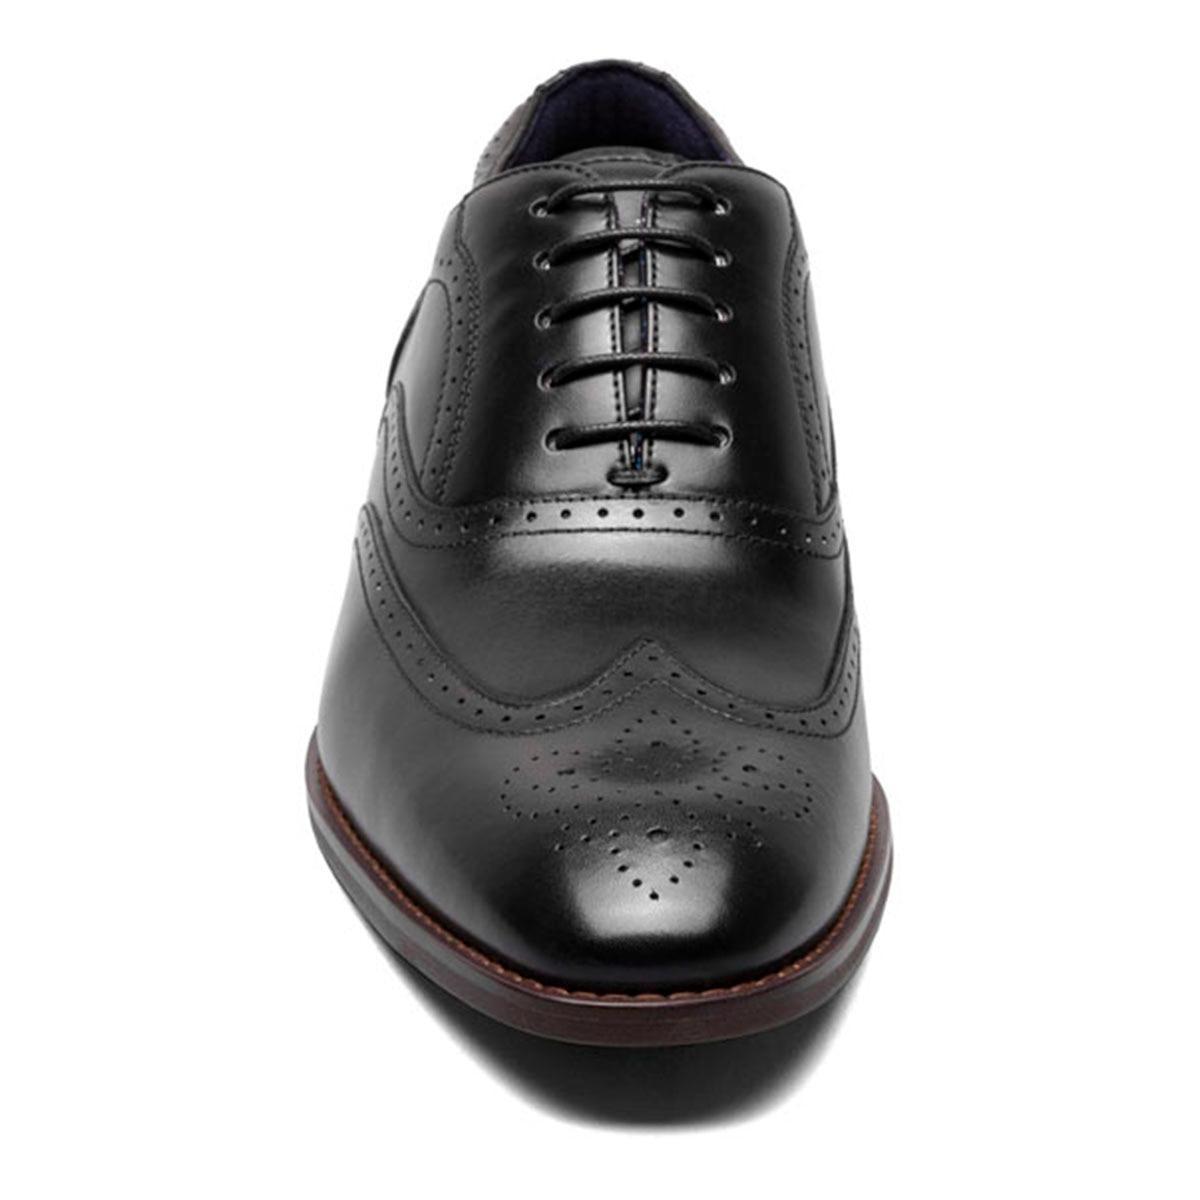 Stacy Adams Kaine Wingtip Oxford Product Image